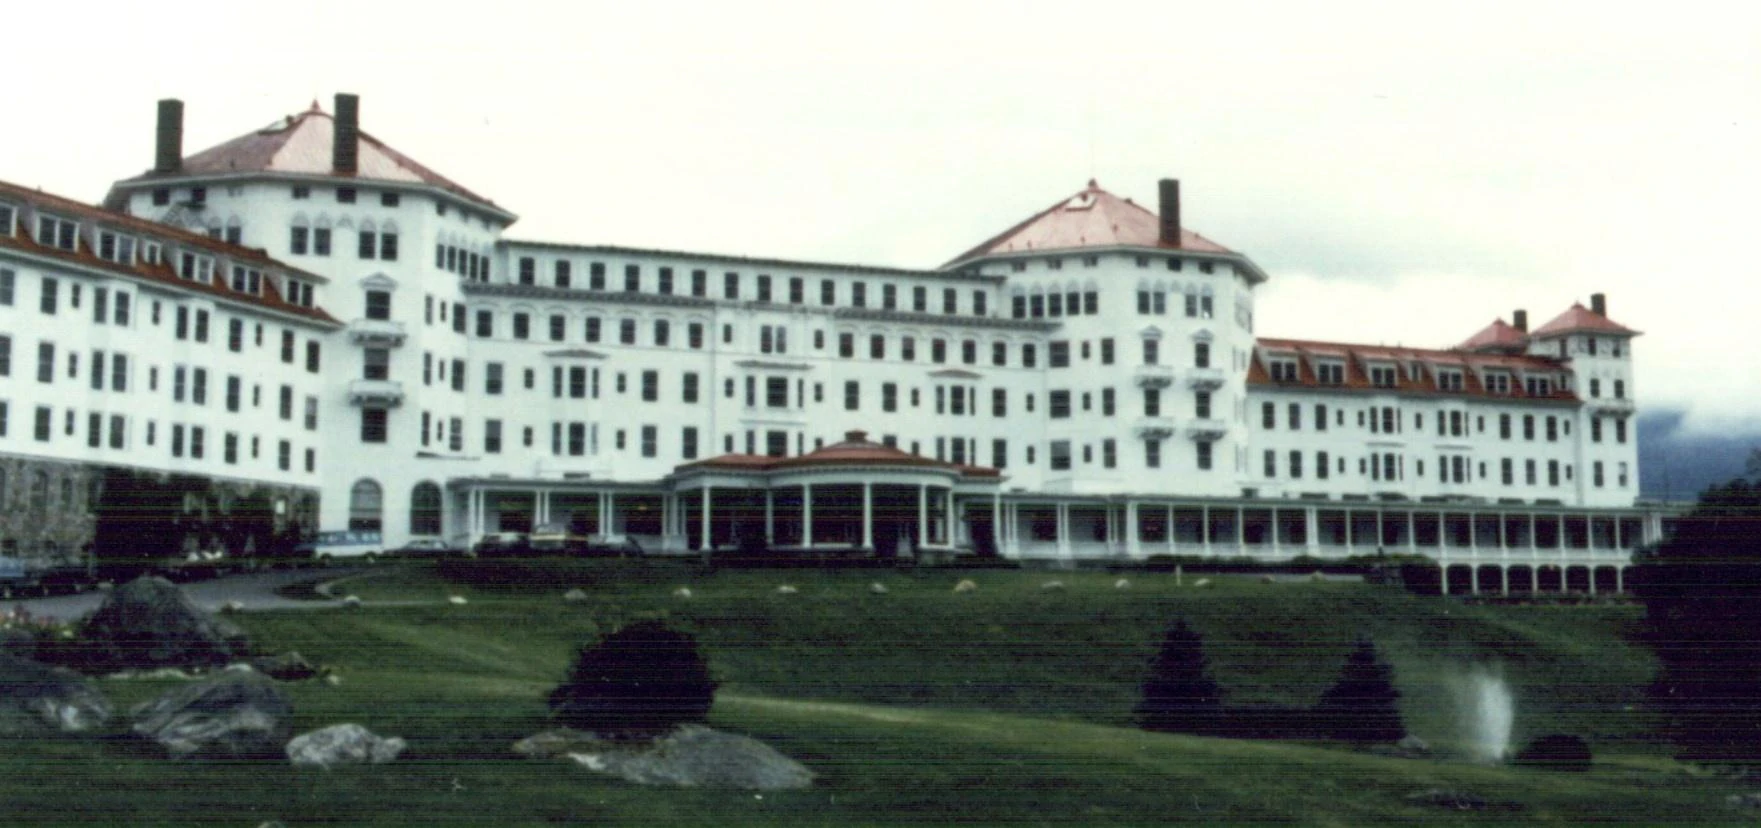 The hotel in which the Bretton Woods Conference was held